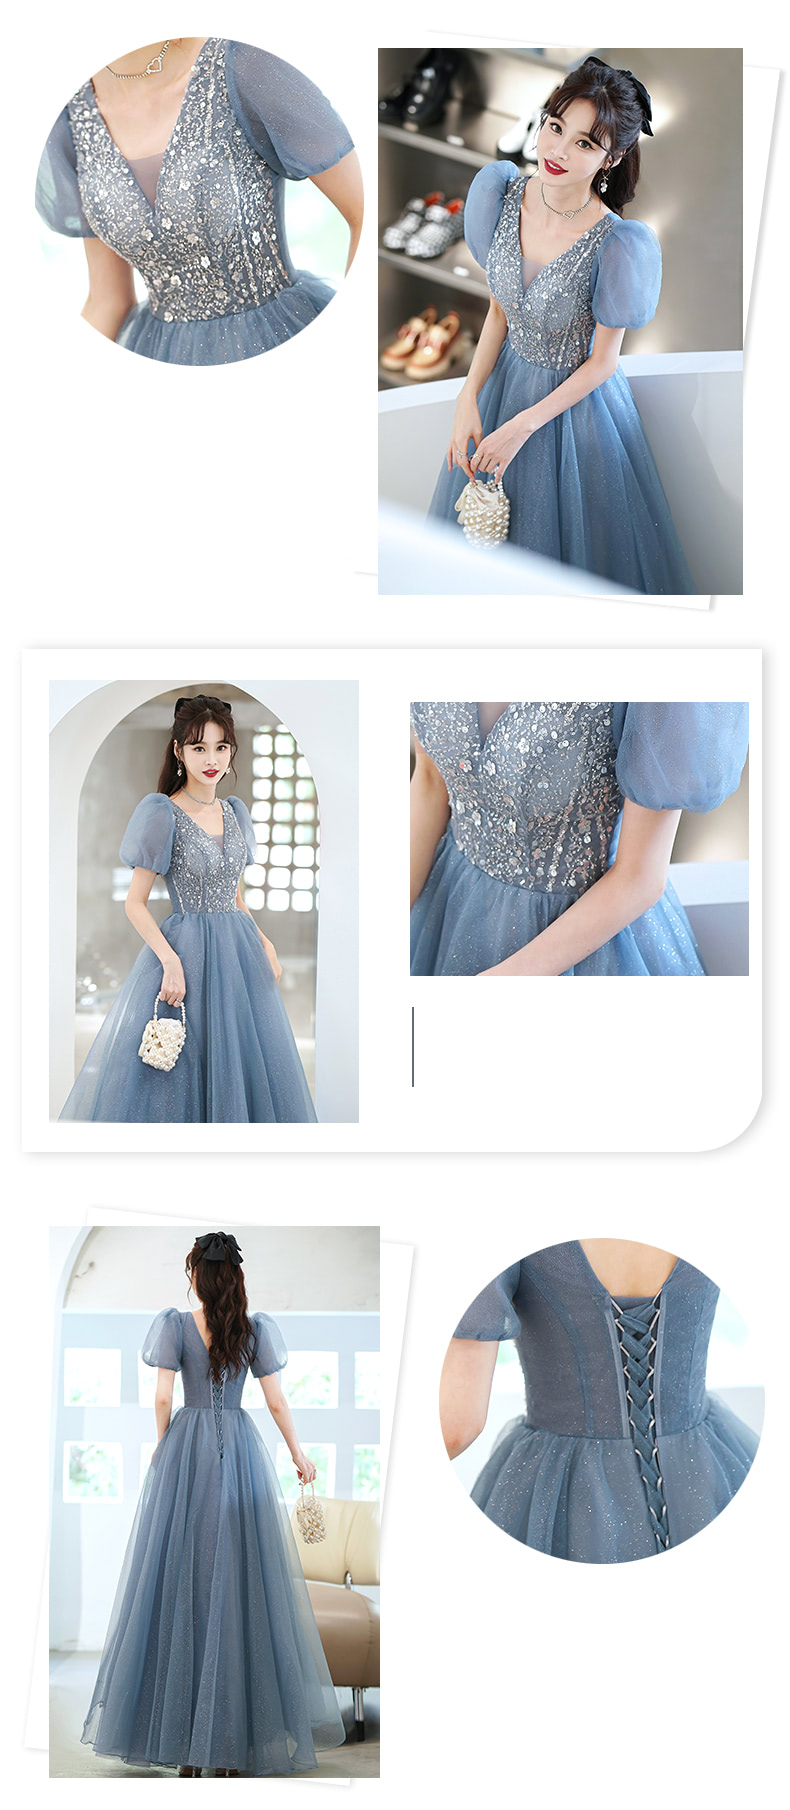 A-Line-Blue-Tulle-Short-Sleeve-Prom-Party-Formal-Evening-Dress12.jpg